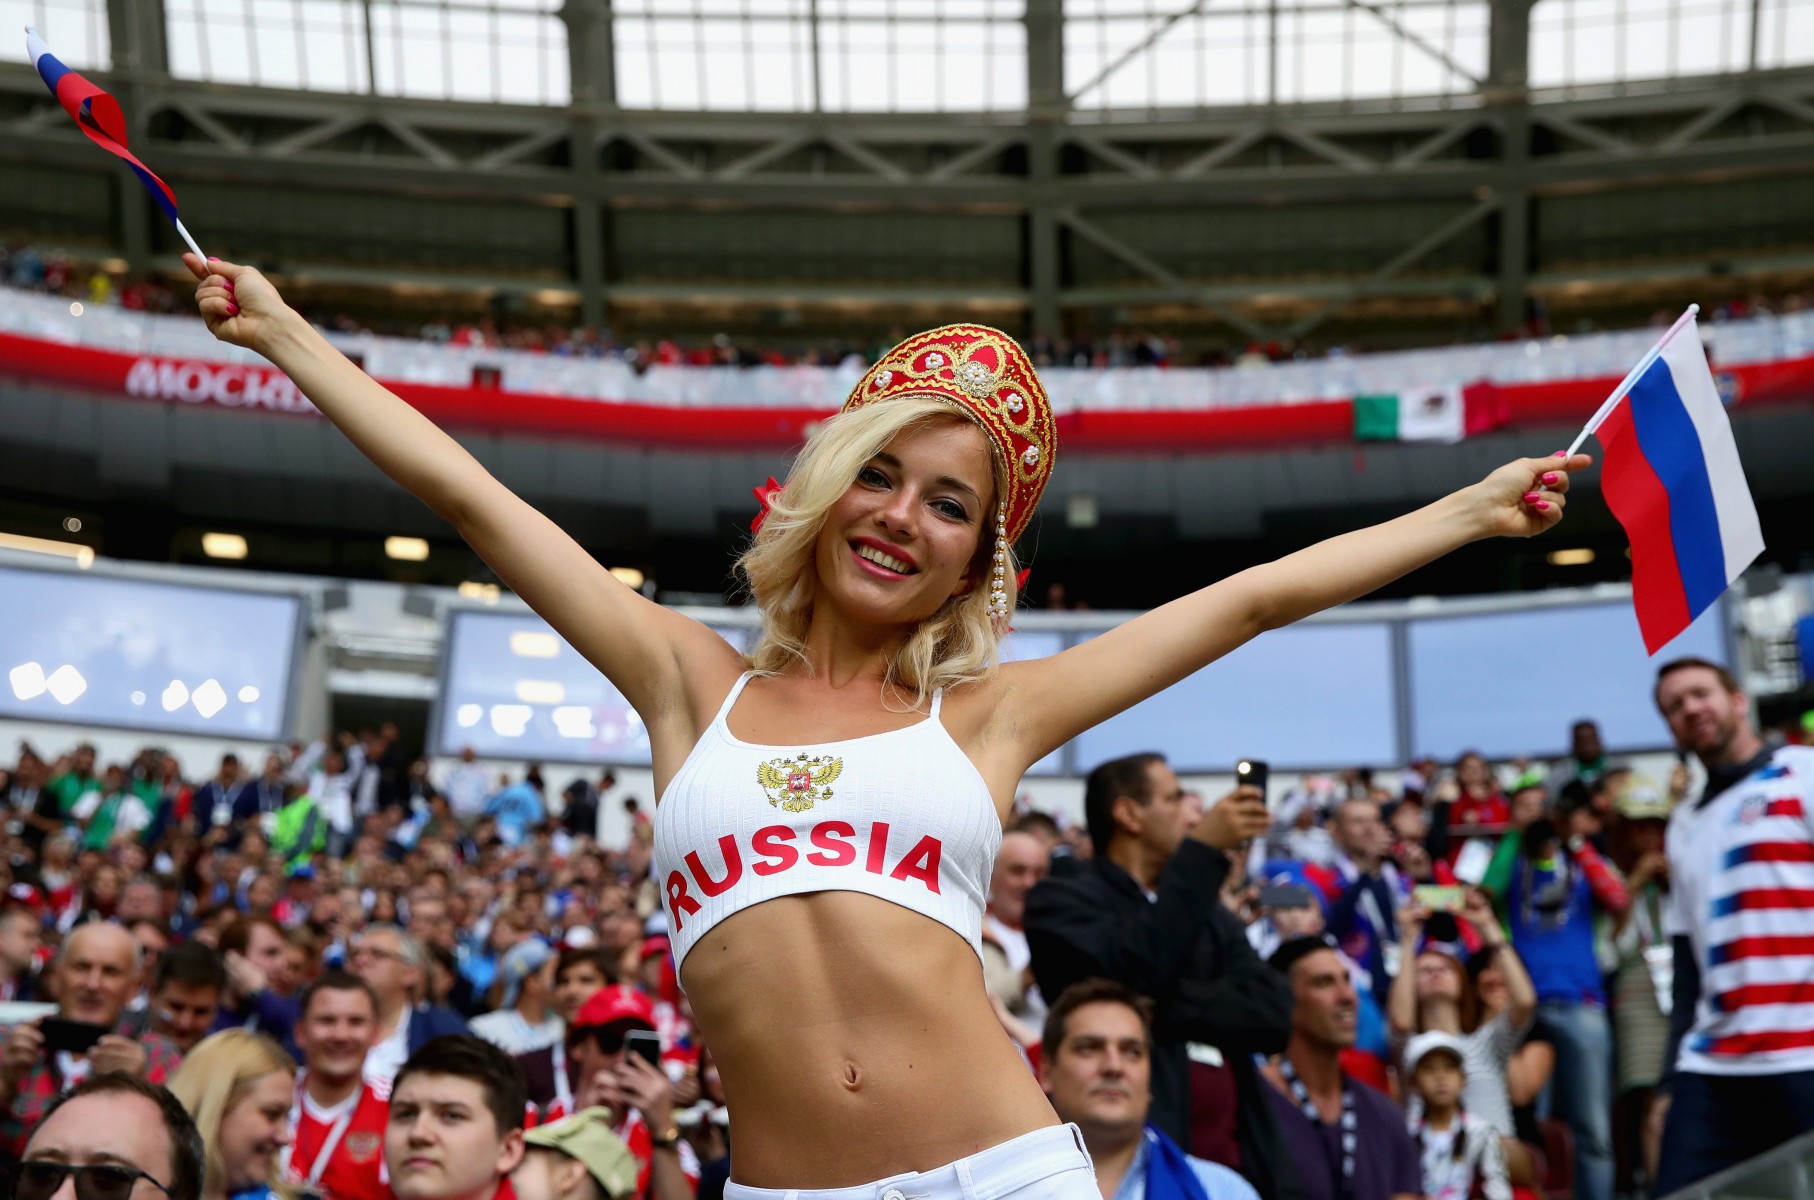 Natalya Nemchinova was called Russia’s sexiest fan at the 2018 World Cup. 